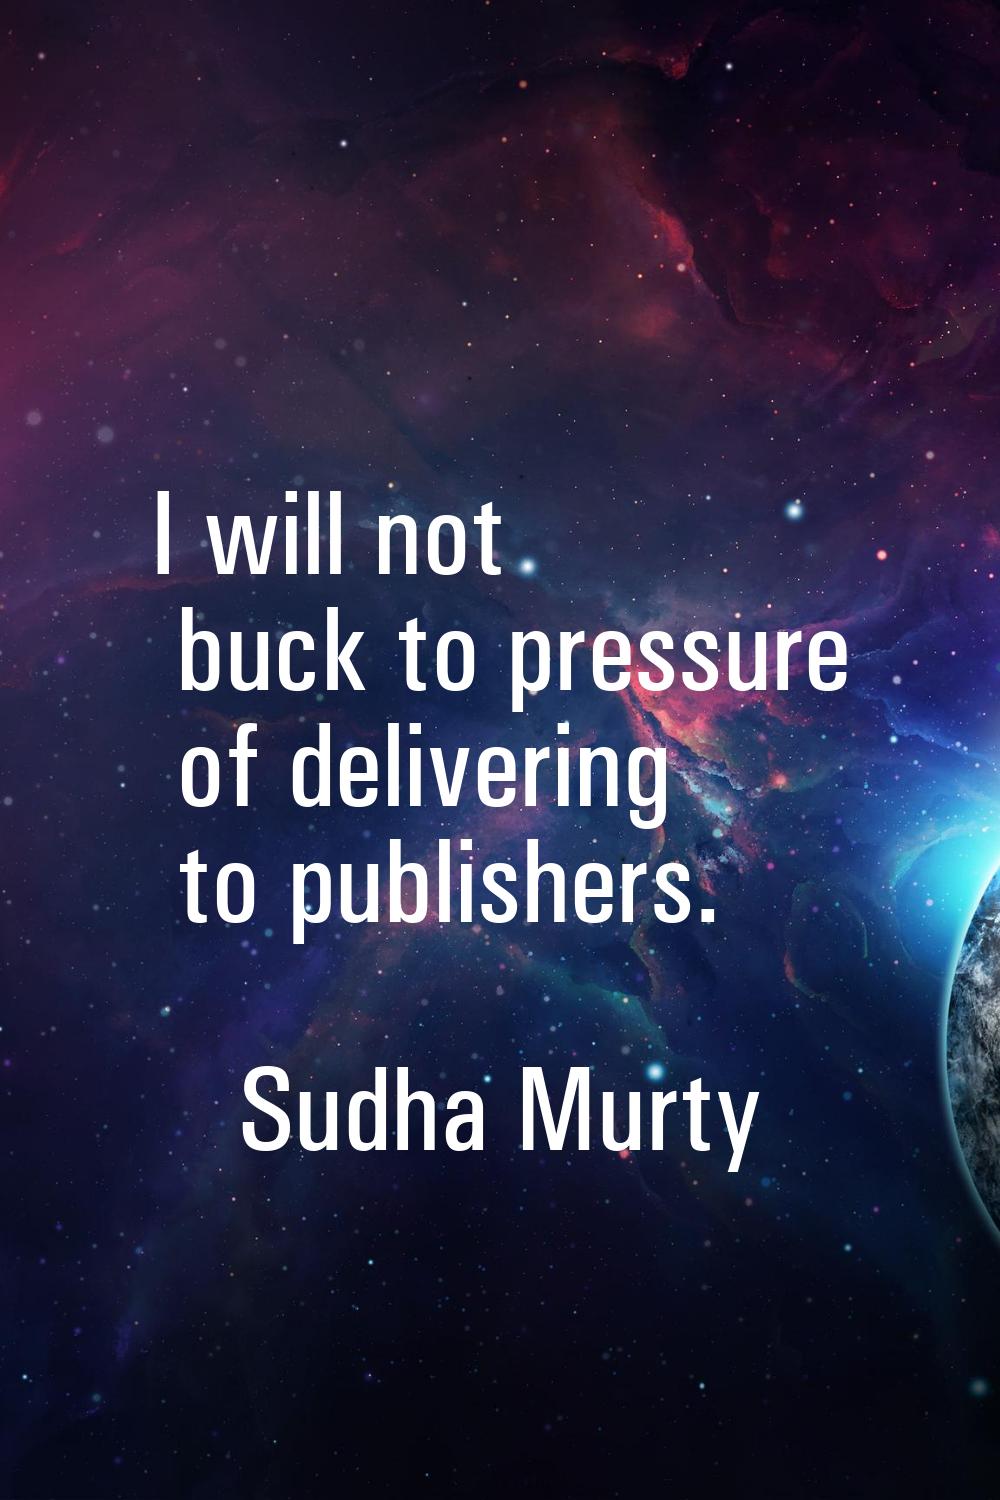 I will not buck to pressure of delivering to publishers.